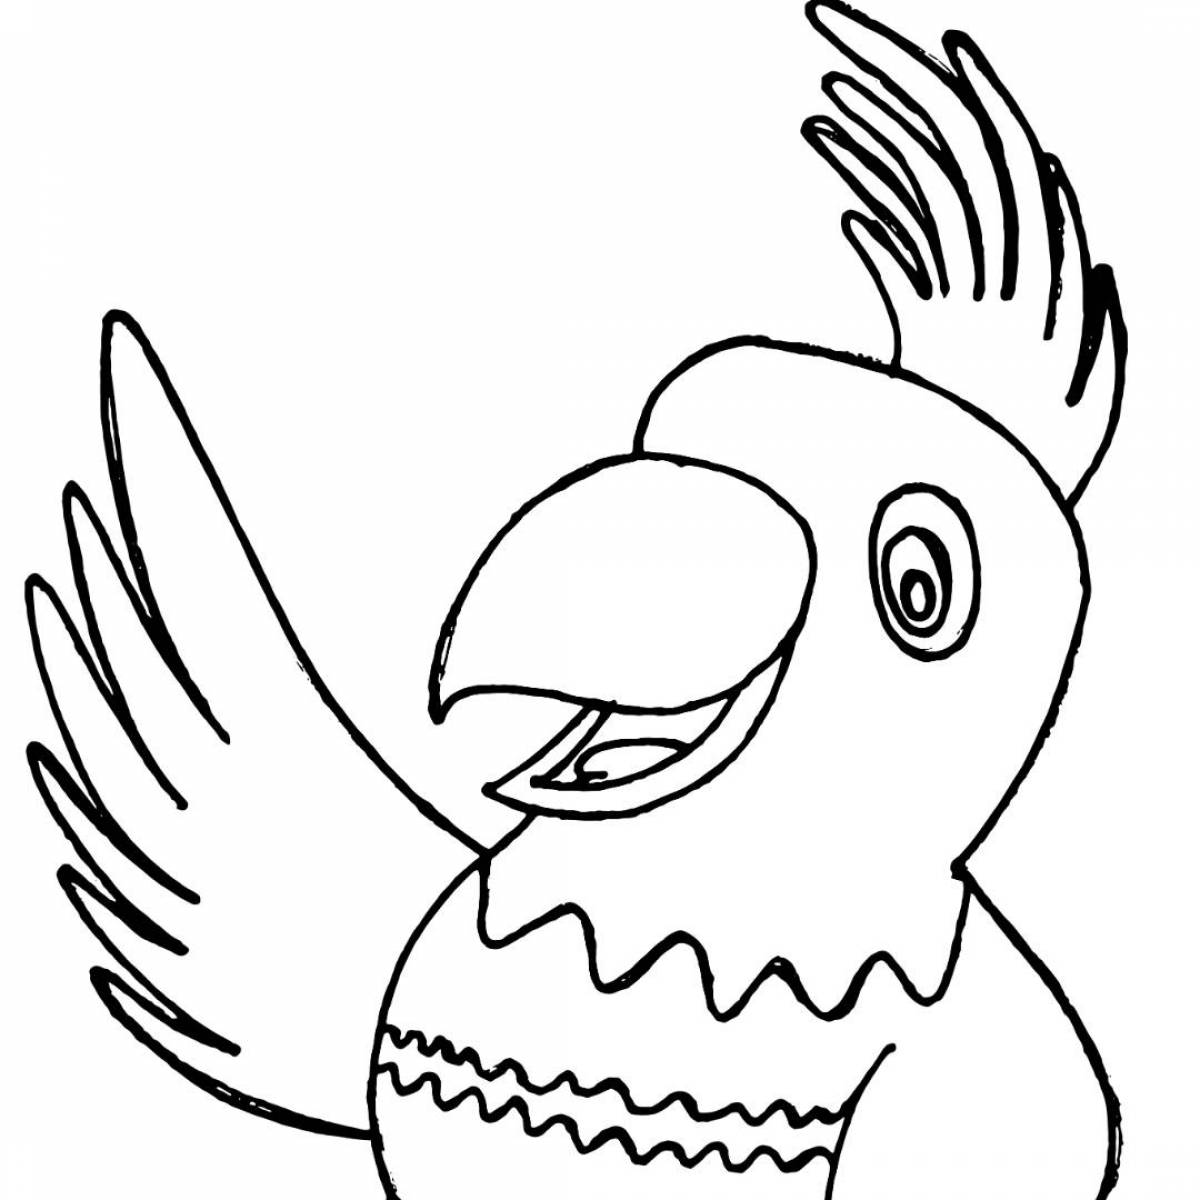 Magic parrot coloring book for kids